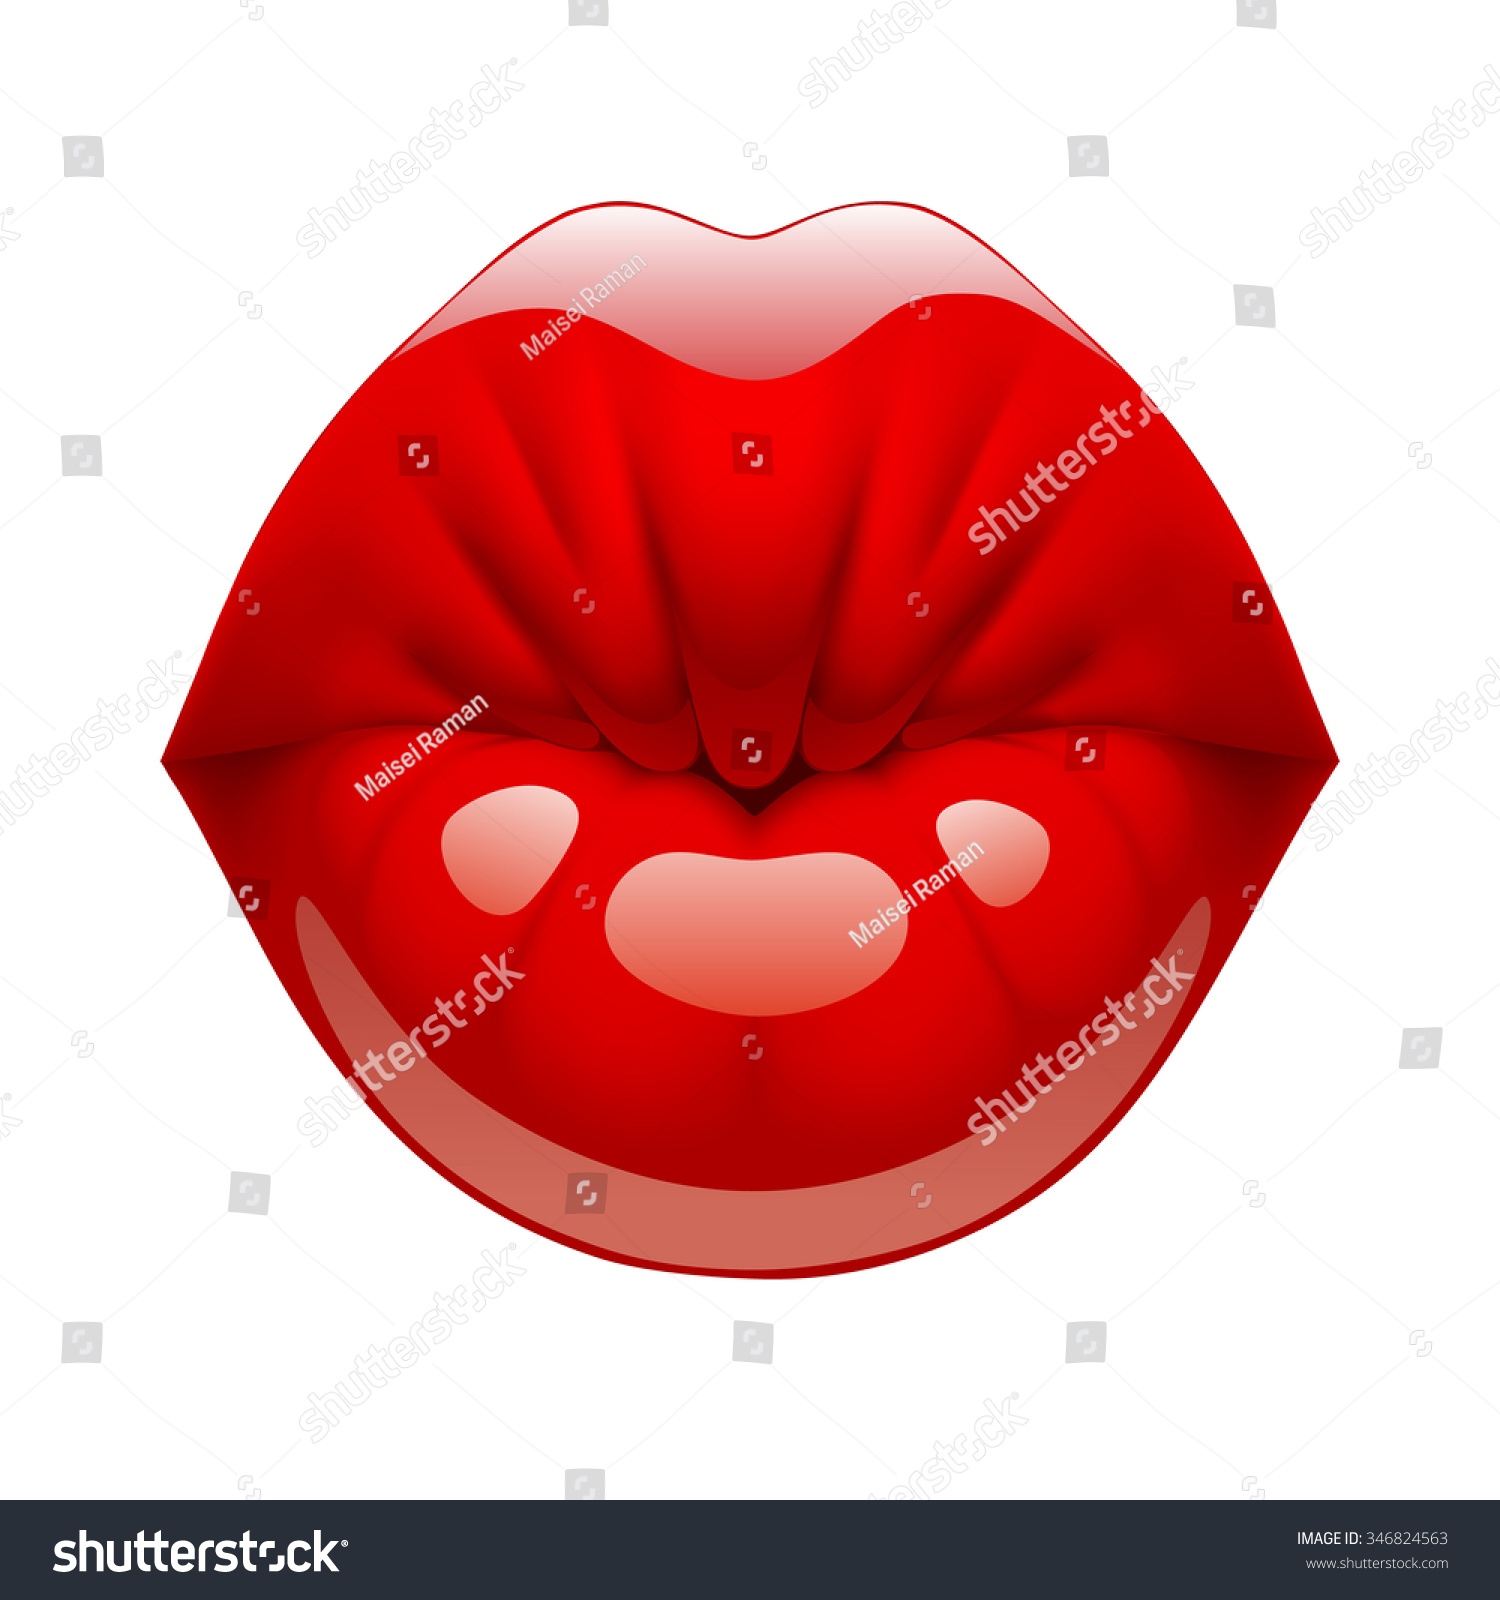 Three Dimensional Female Glossy Kissing Red Lips Lips Of Woman In Kiss